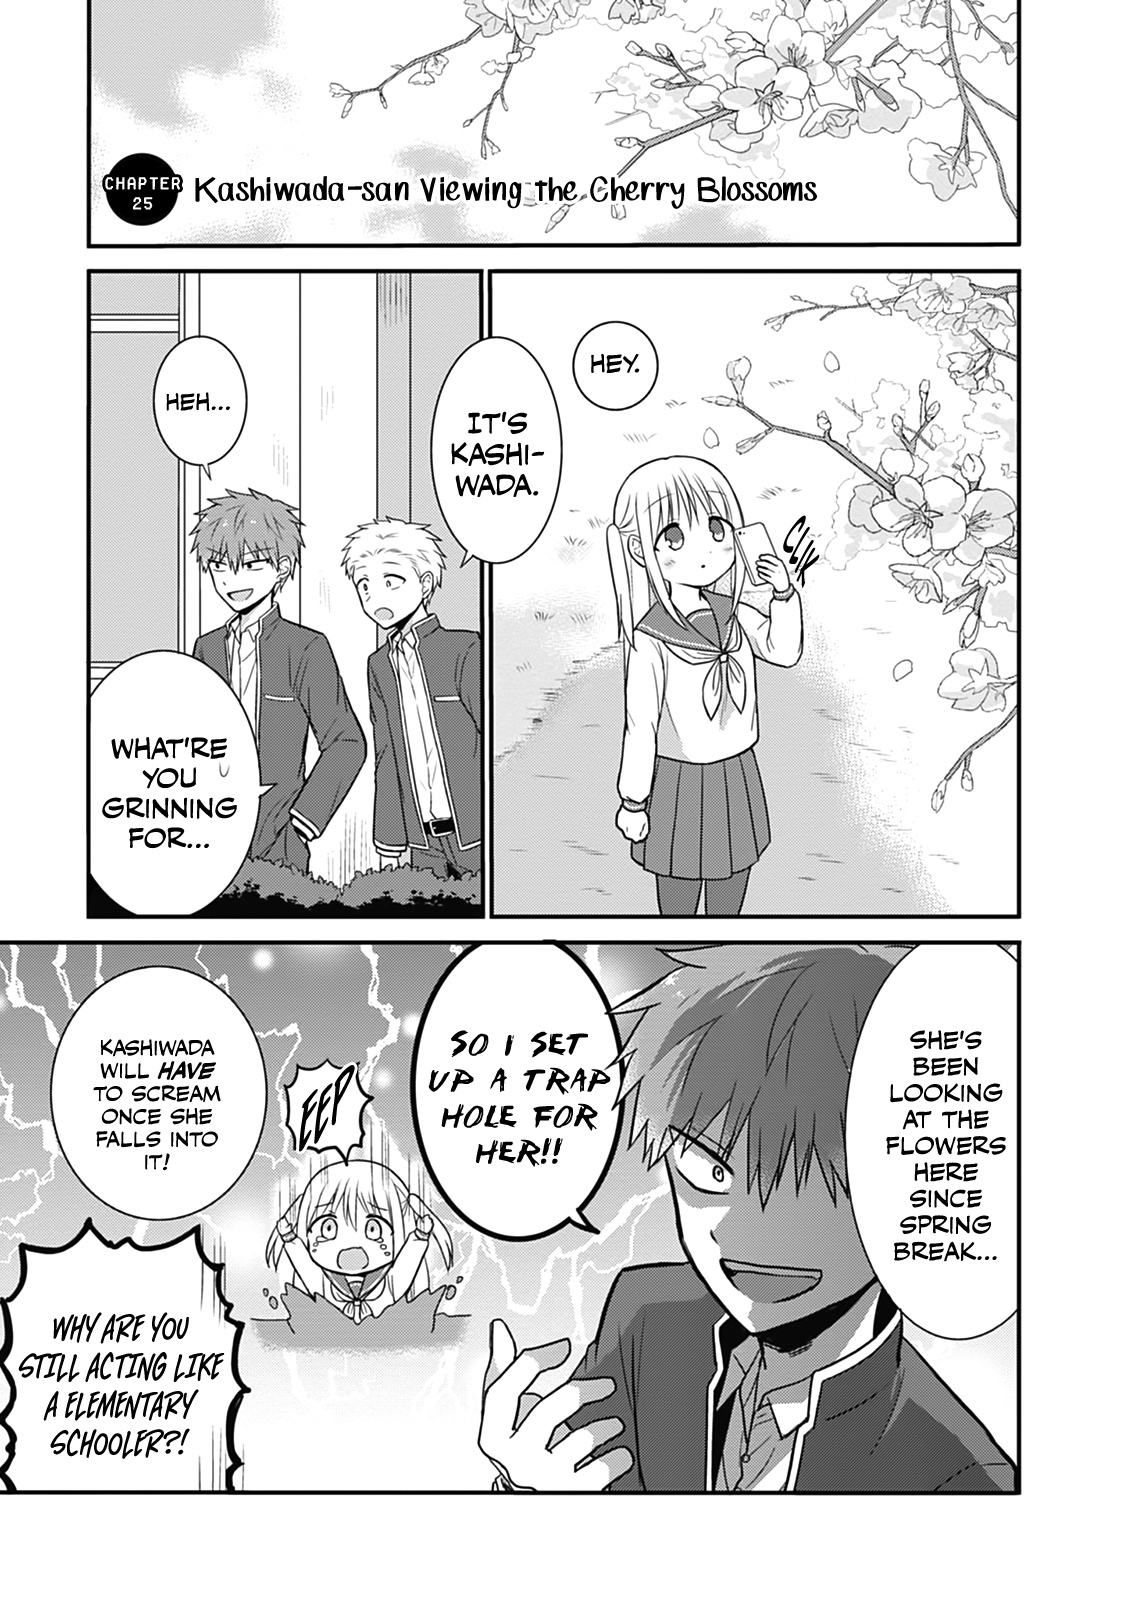 Expressionless Kashiwada-San And Emotional Oota-Kun Vol.2 Chapter 25: Kashiwada-San Viewing The Cherry Blossoms - Picture 1